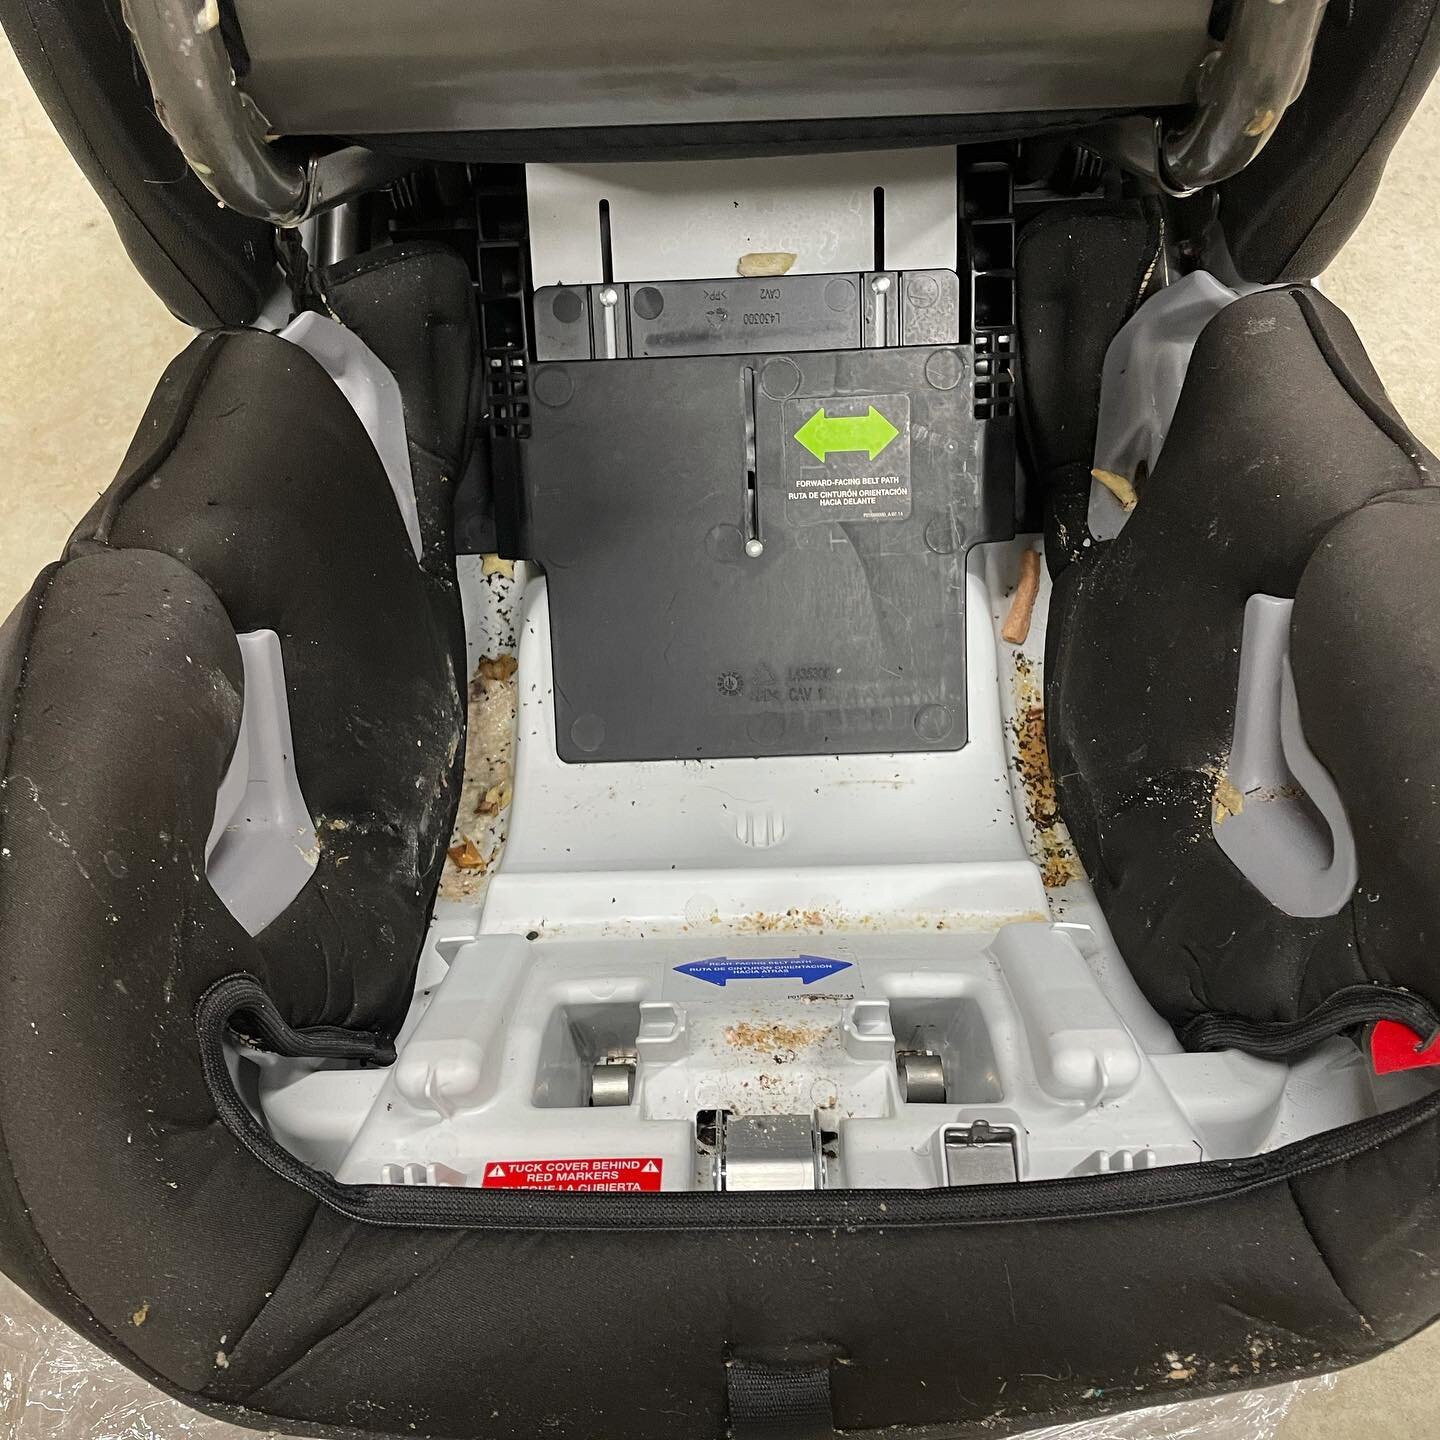 Bit of a spewy clean last night 🧼 

#buggyboutique #buggycleaningbusiness #buggycleaning #carseatcleaning #britax #britaxclicktight